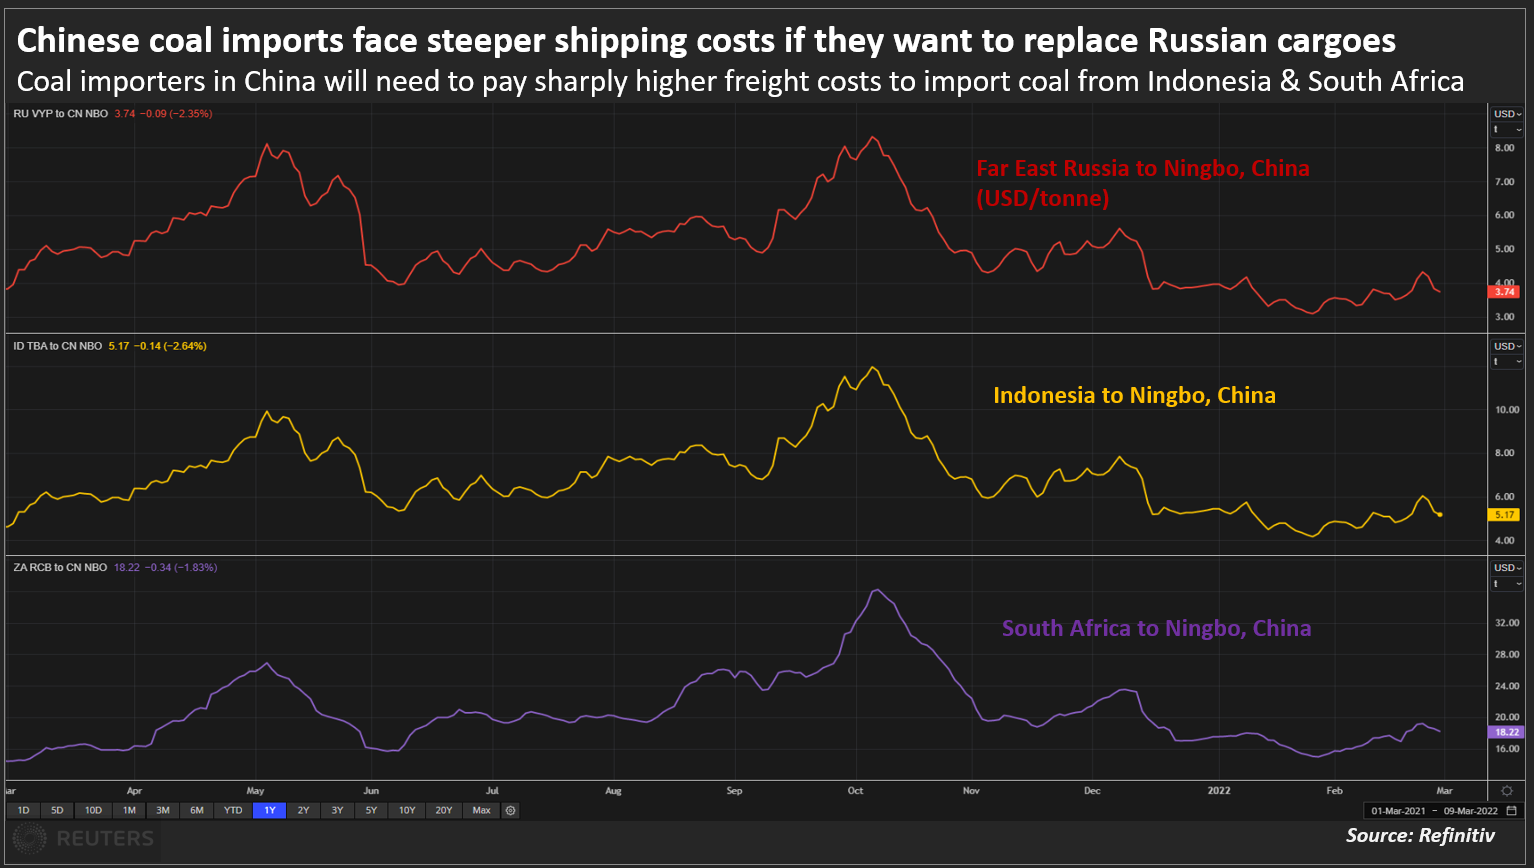 Chinese coal imports face steeper shipping costs if they want to replace Russian cargoes